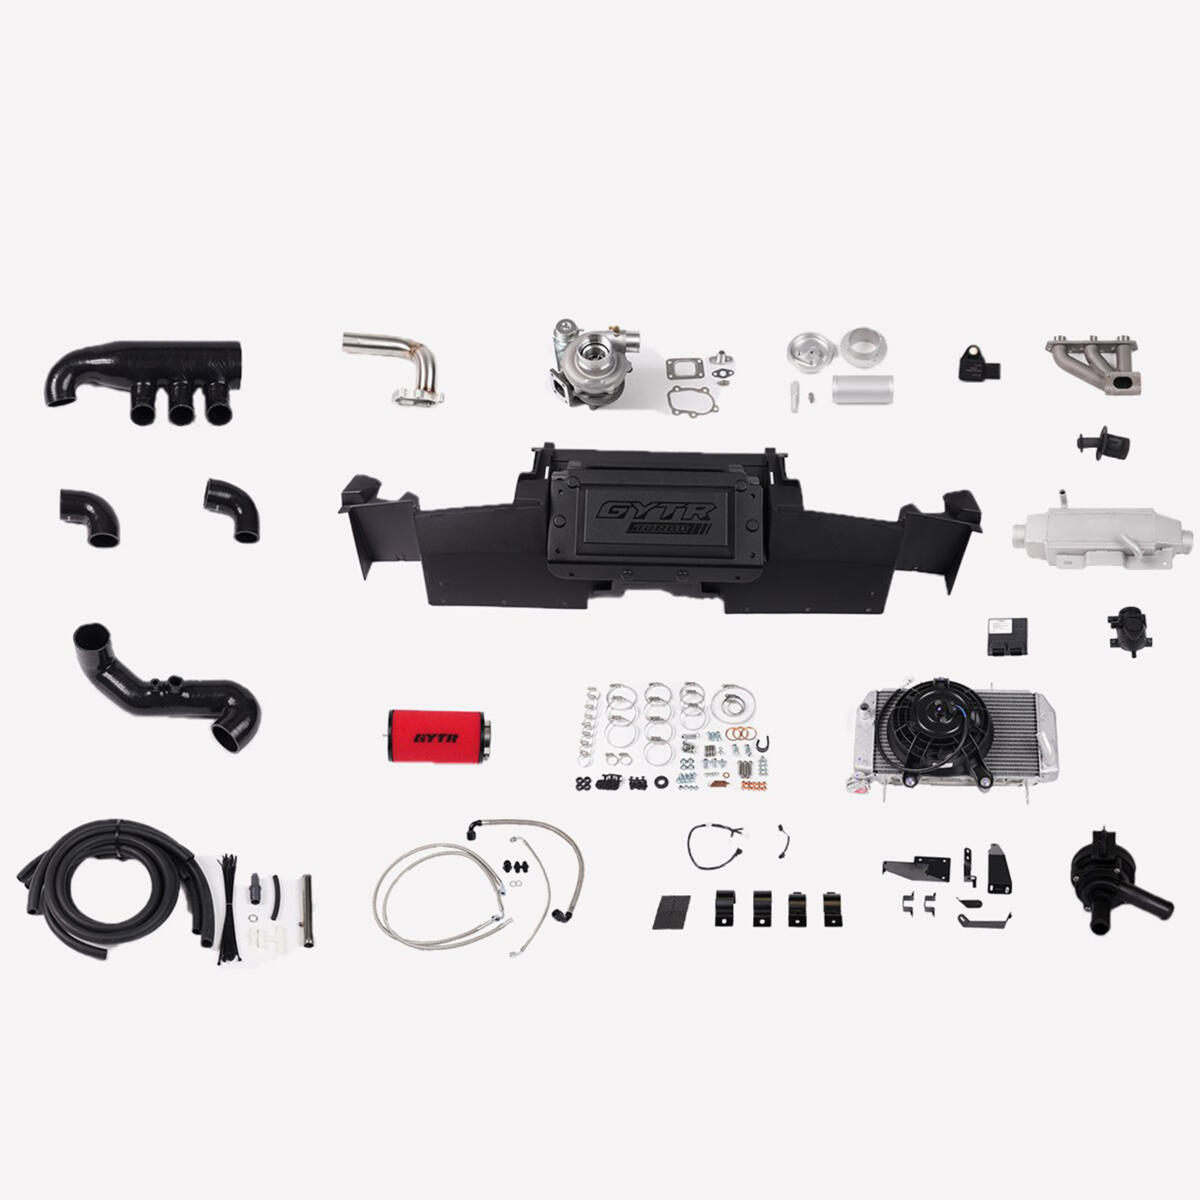 This kit is designed for the no limits driver that wants to pull more power from their YXZ. We scoured the globe, sourcing the highest quality components available – determined to build a turbo kit unlike any other. During development, no detail was overlooked. You’ll immediately feel the power as soon as you hit the gas